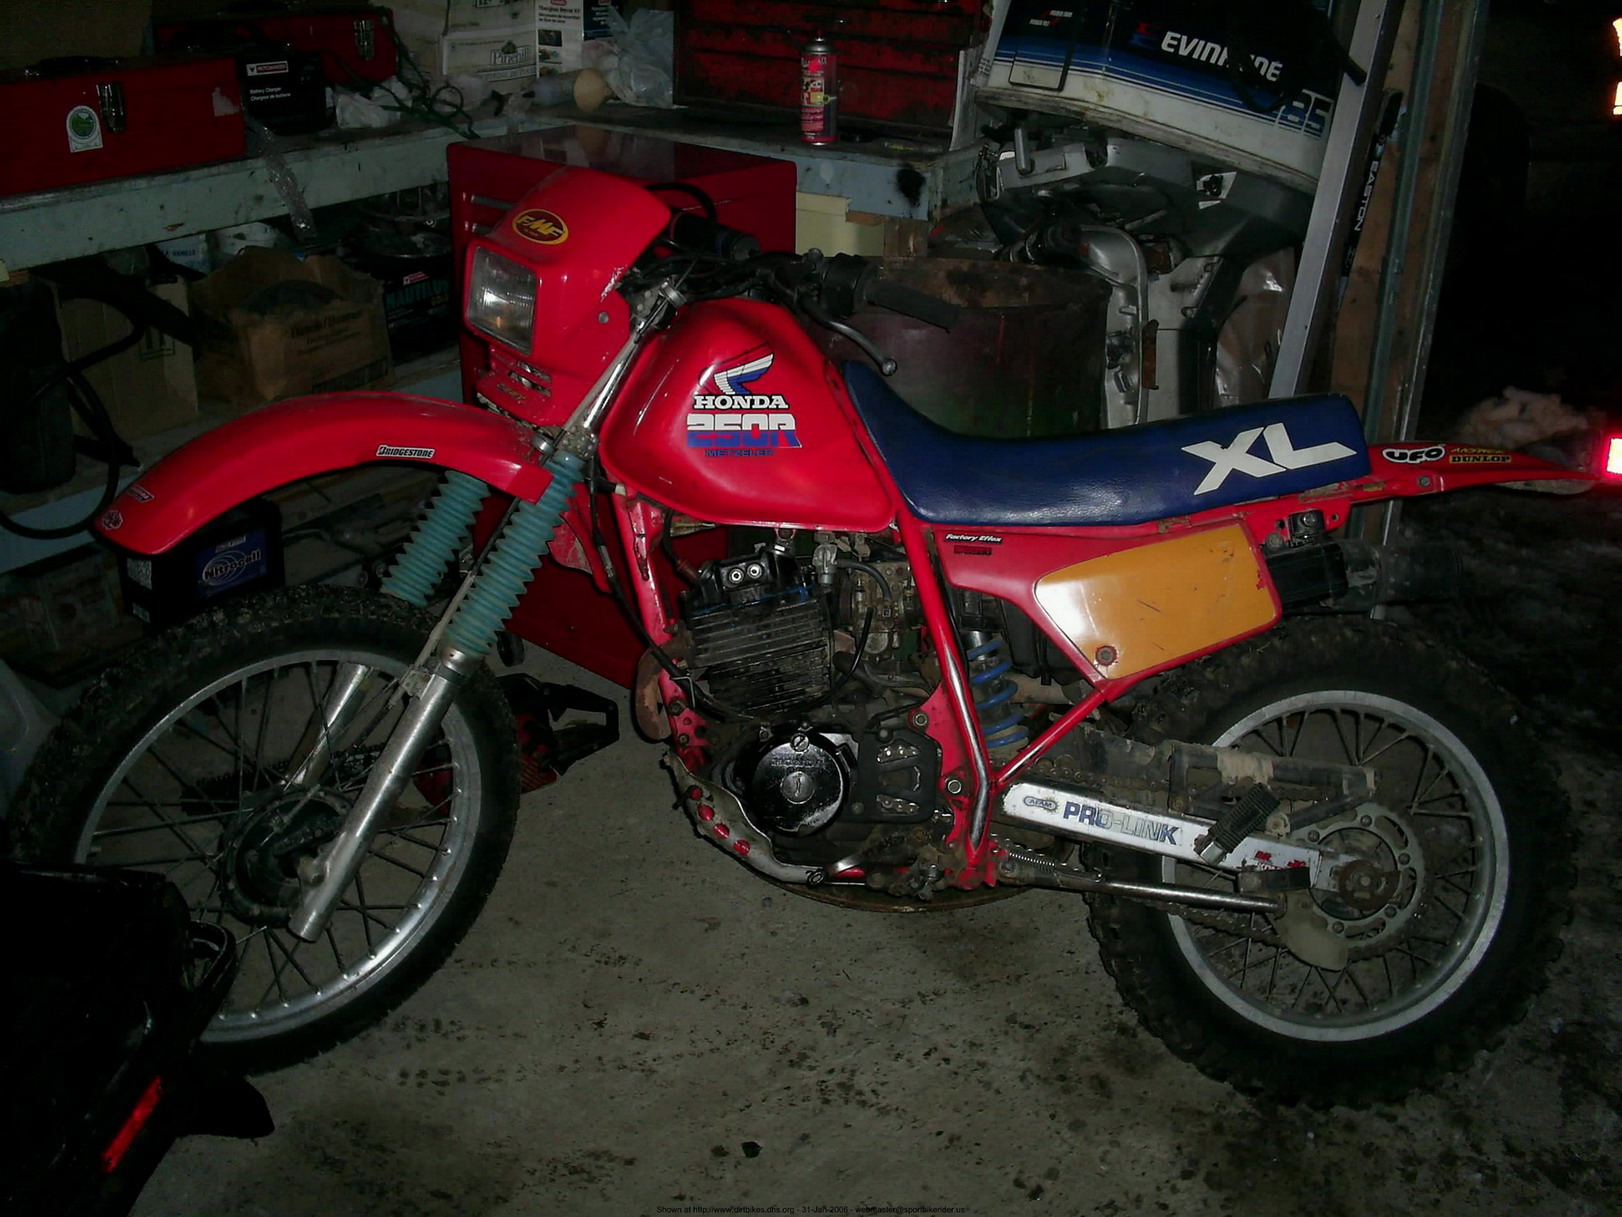 Review Of Honda Xl 250 R Reduced Effect 1985 Pictures Live Photos Description Honda Xl 250 R Reduced Effect 1985 Lovers Of Motorcycles